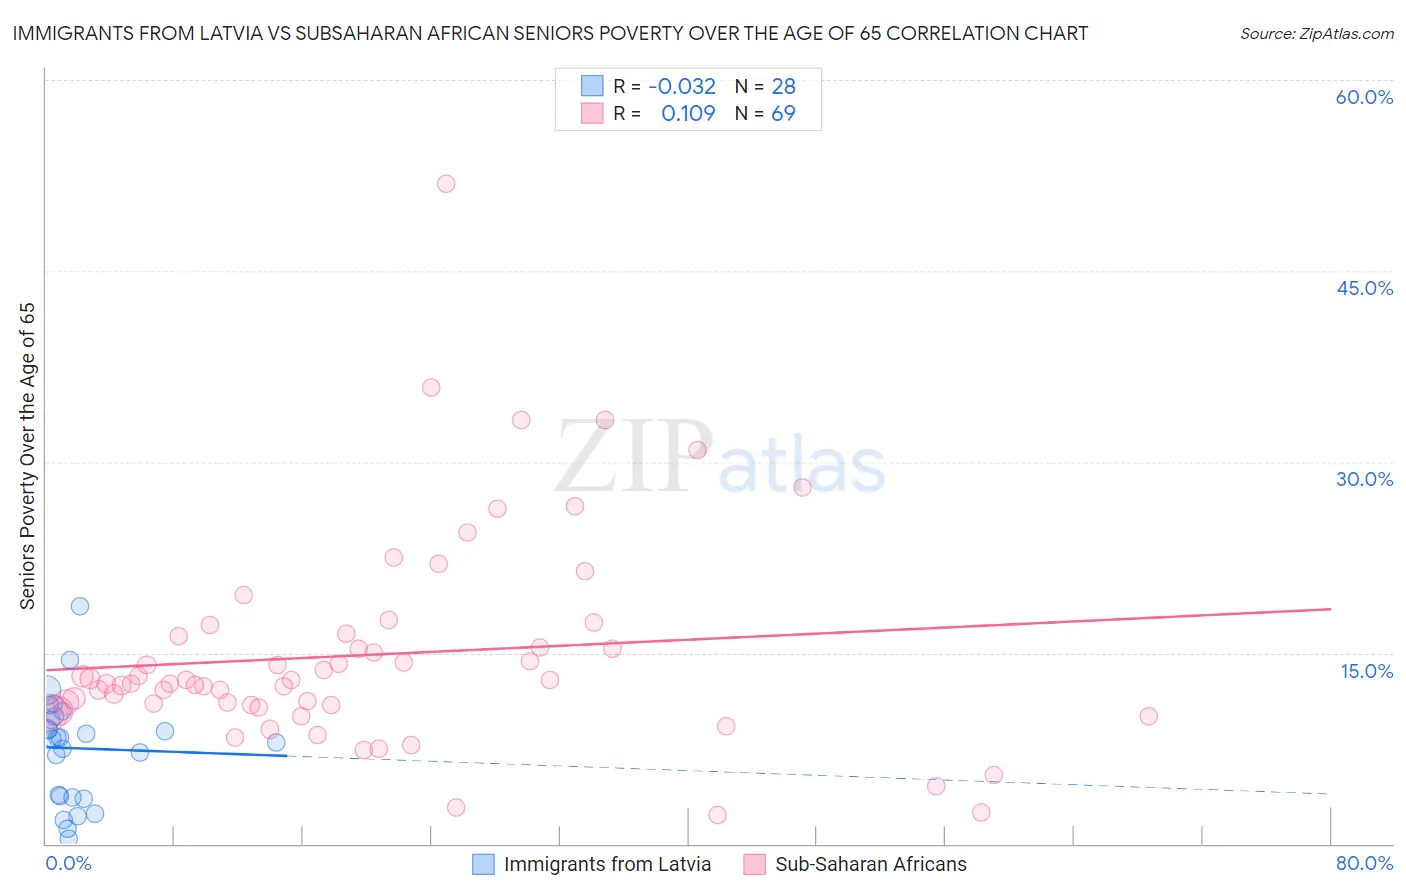 Immigrants from Latvia vs Subsaharan African Seniors Poverty Over the Age of 65